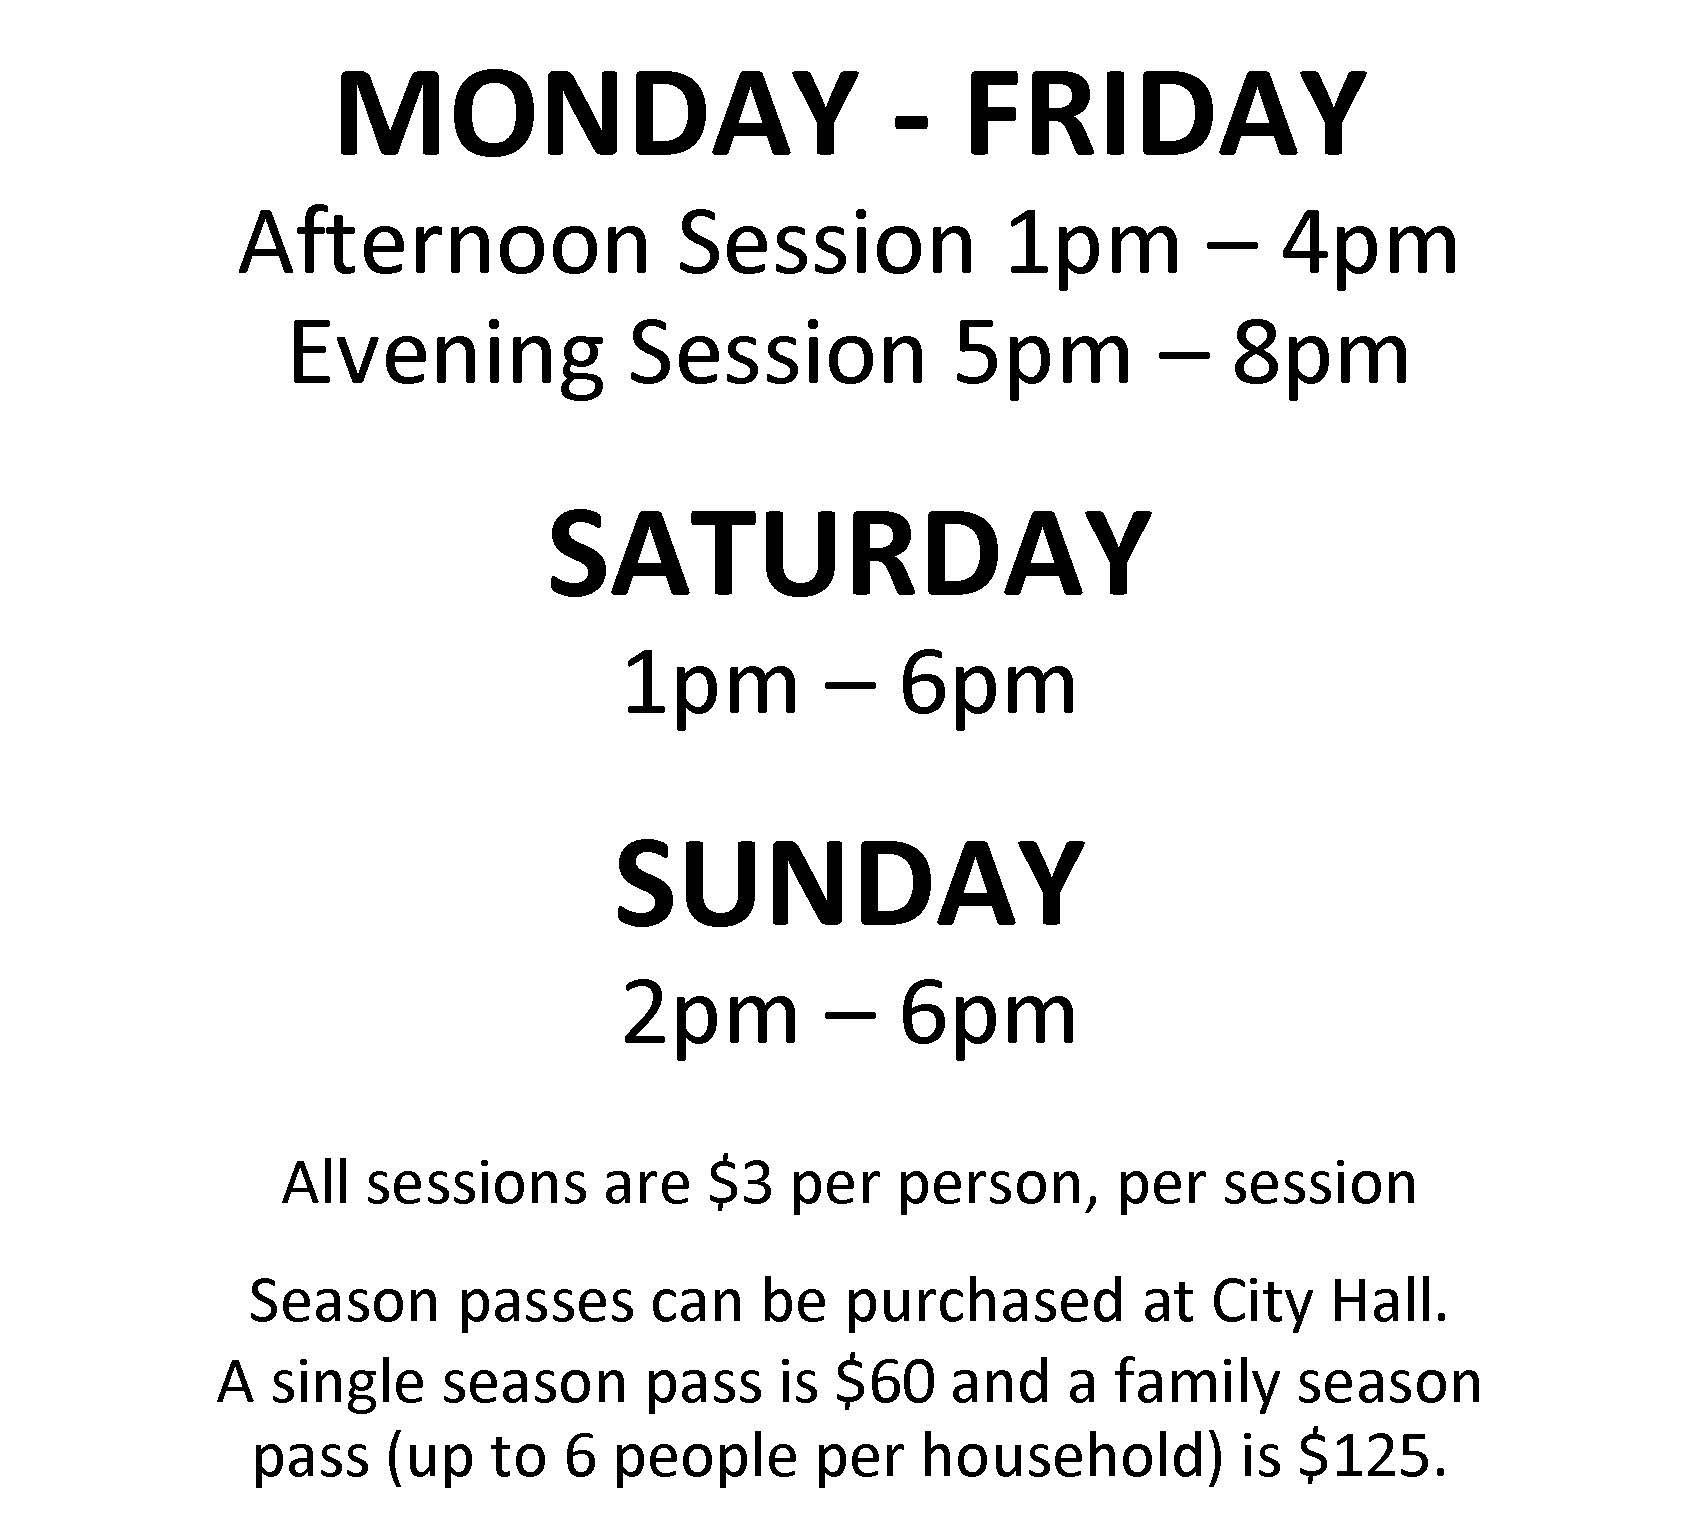 Monday - Friday Afternoon Session 1pm-4pm Evening Session 5pm-8pm Saturday 1pm-6pm Sunday 2pm-6pm All sessions are $3 per person, per session Single season passes and family season passes can be purchased at City Hall for $60 and $125 respectively.